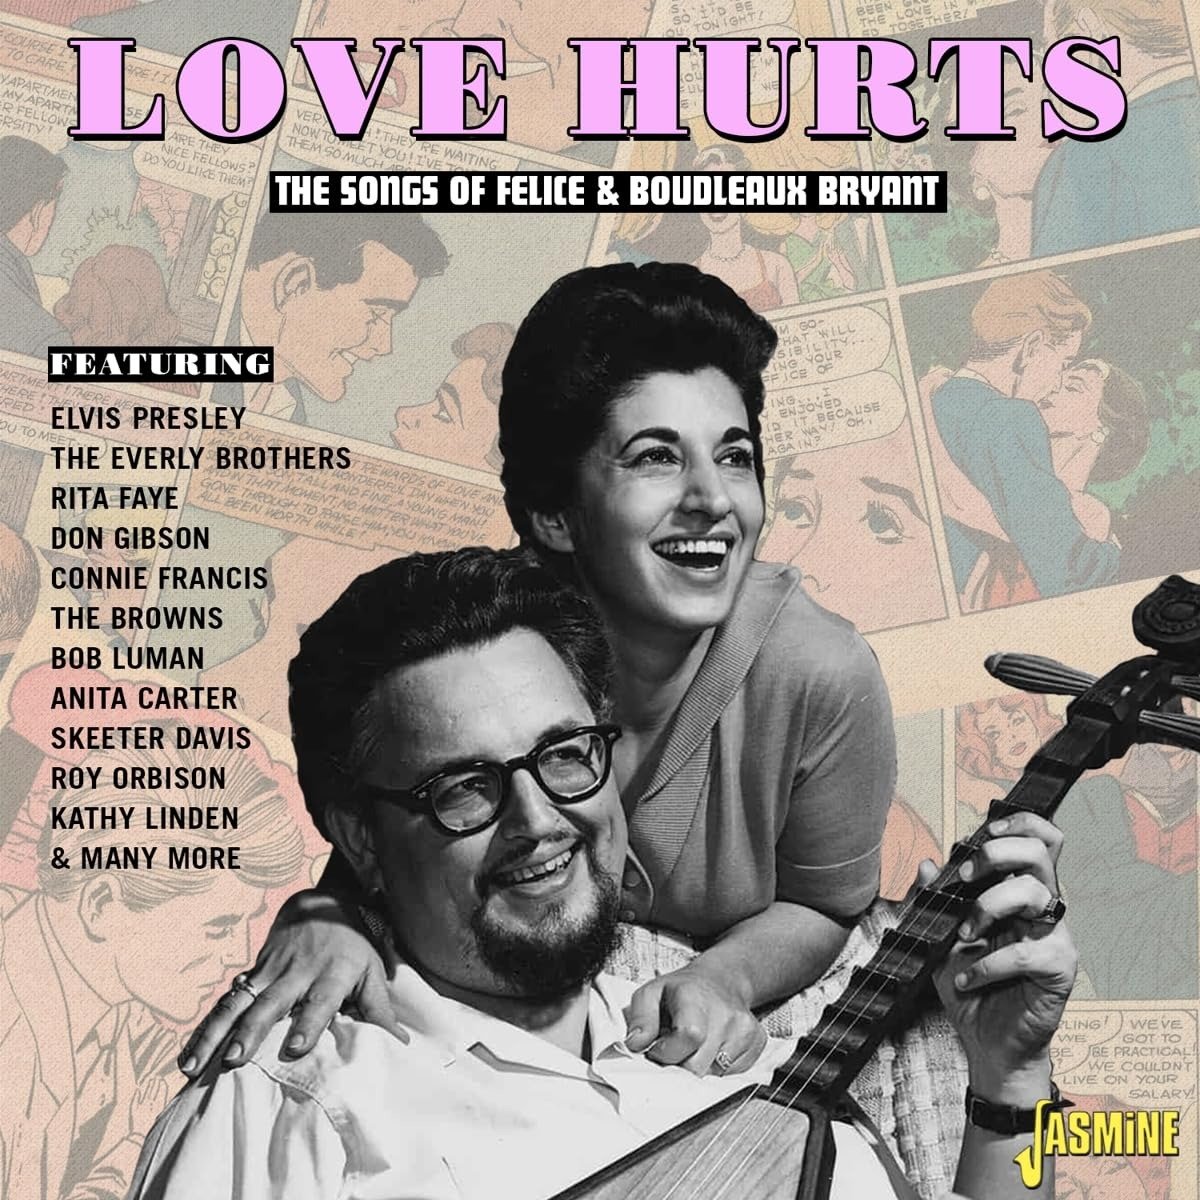 CD Shop - V/A LOVE HURTS - THE SONGS OF FELICE & BOUDLEAUX BRYANT